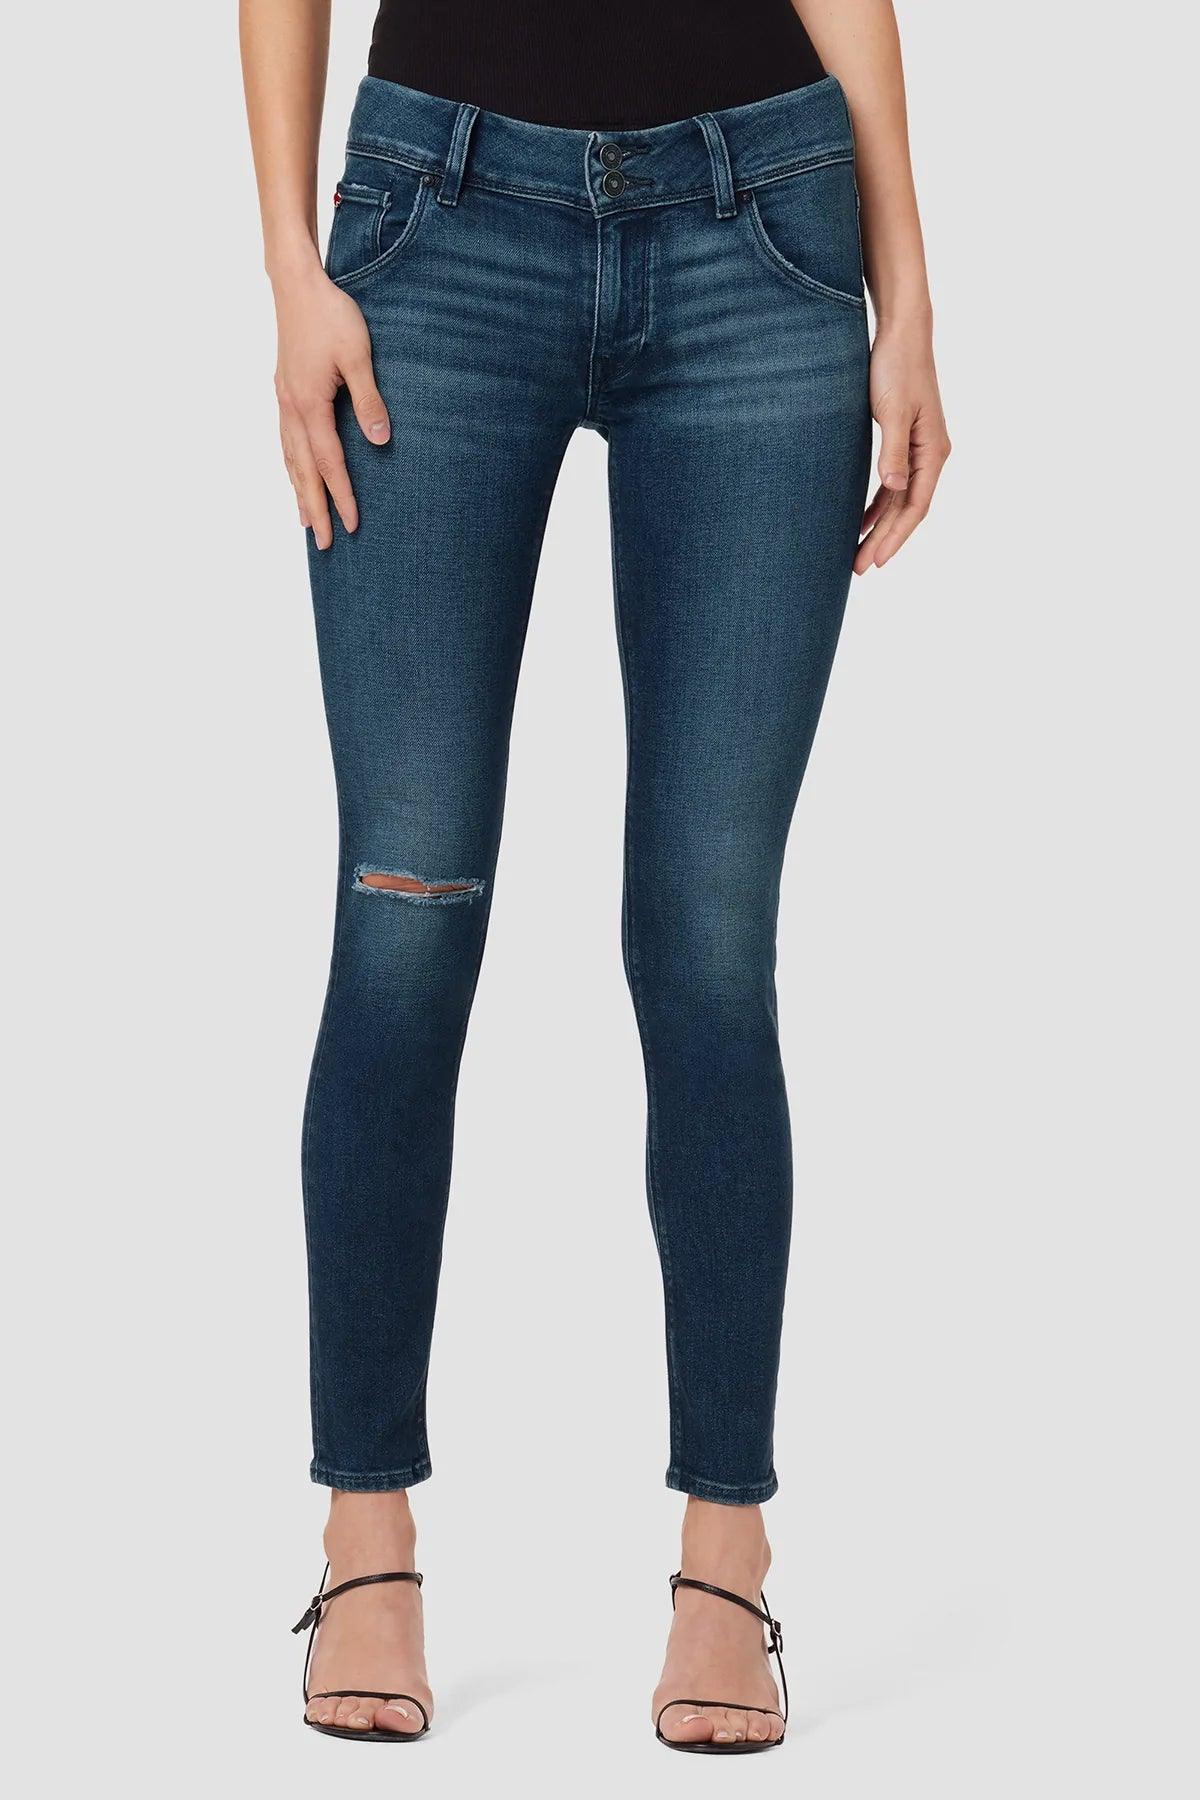 Collin Mid-Rise Skinny Jeans by Hudson - Haven